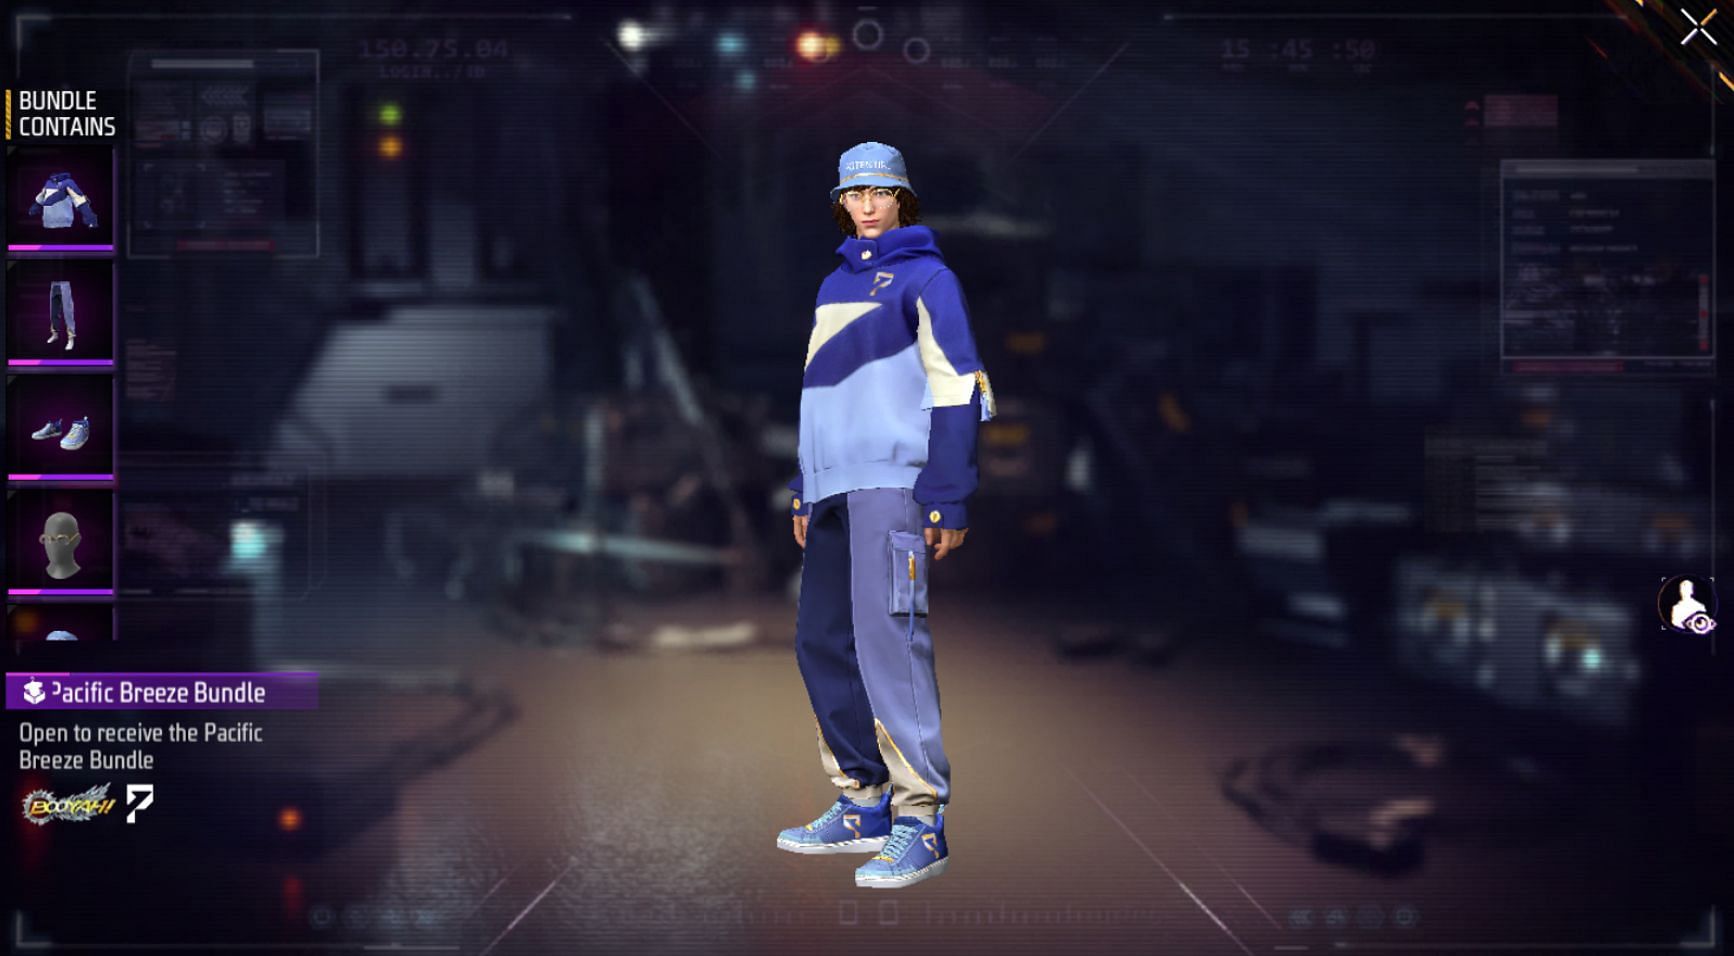 Pacific Breeze Bundle from Potential brand (Image via Free Fire MAX)